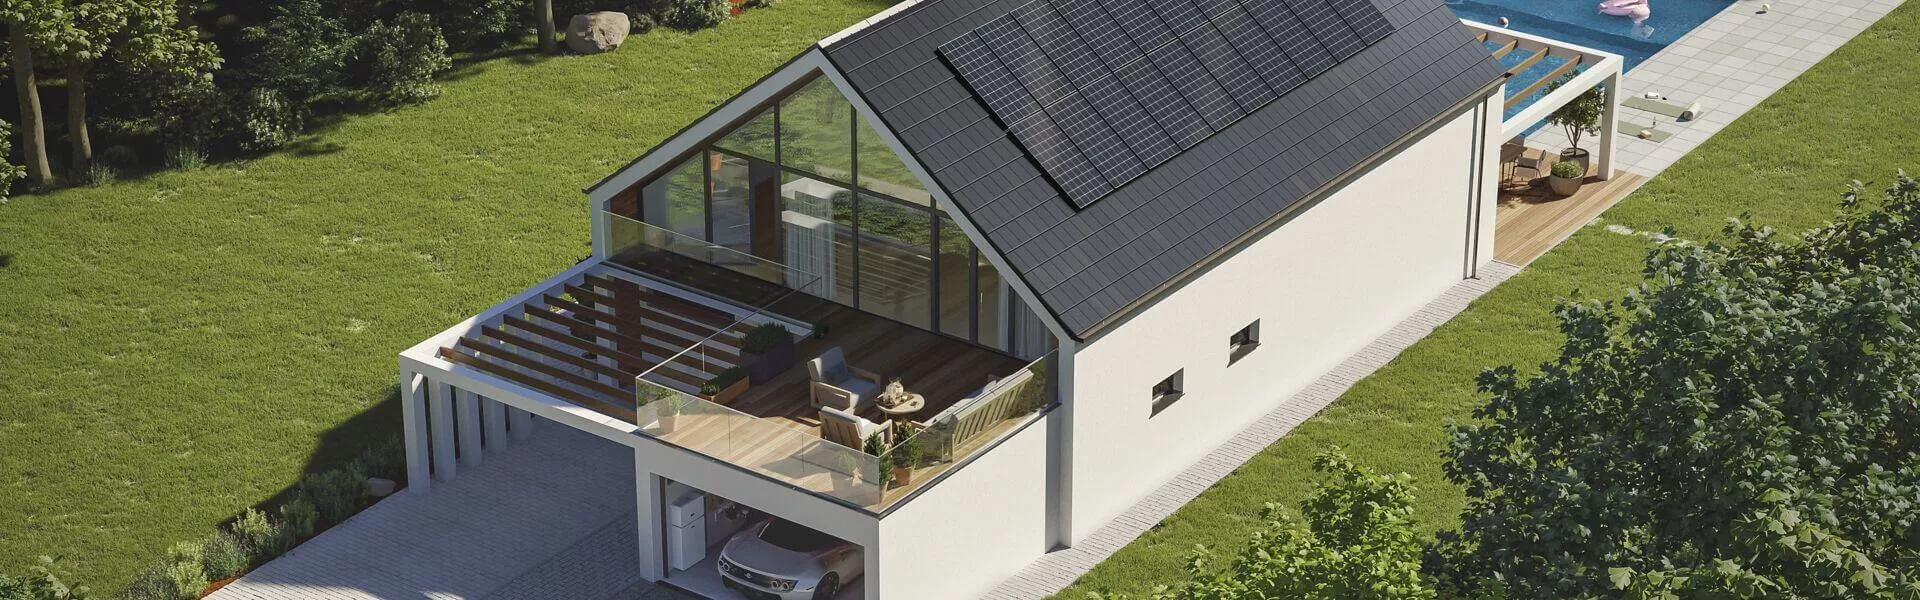 Solar Panels for Home - SunPower ONE Ecosystem